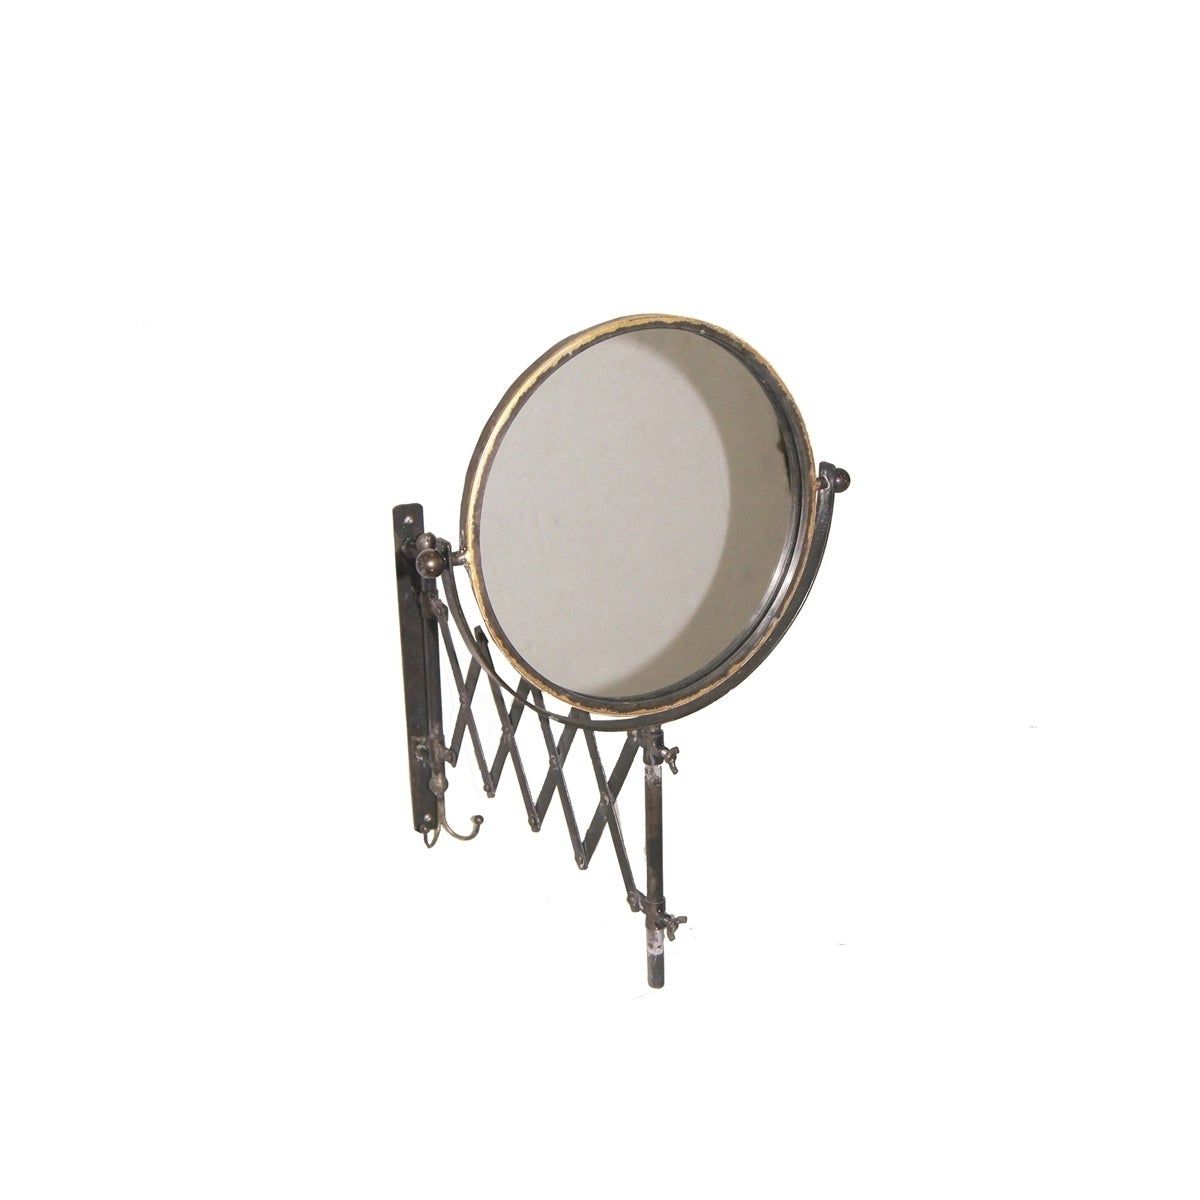 Accordion Wall Mirrors With Regard To Latest Sagebrook Home 13588 Decorative Accordion Wall Mount Mirror, Gold  Iron,mirror, 13.75 X 12.75 X  (View 4 of 20)